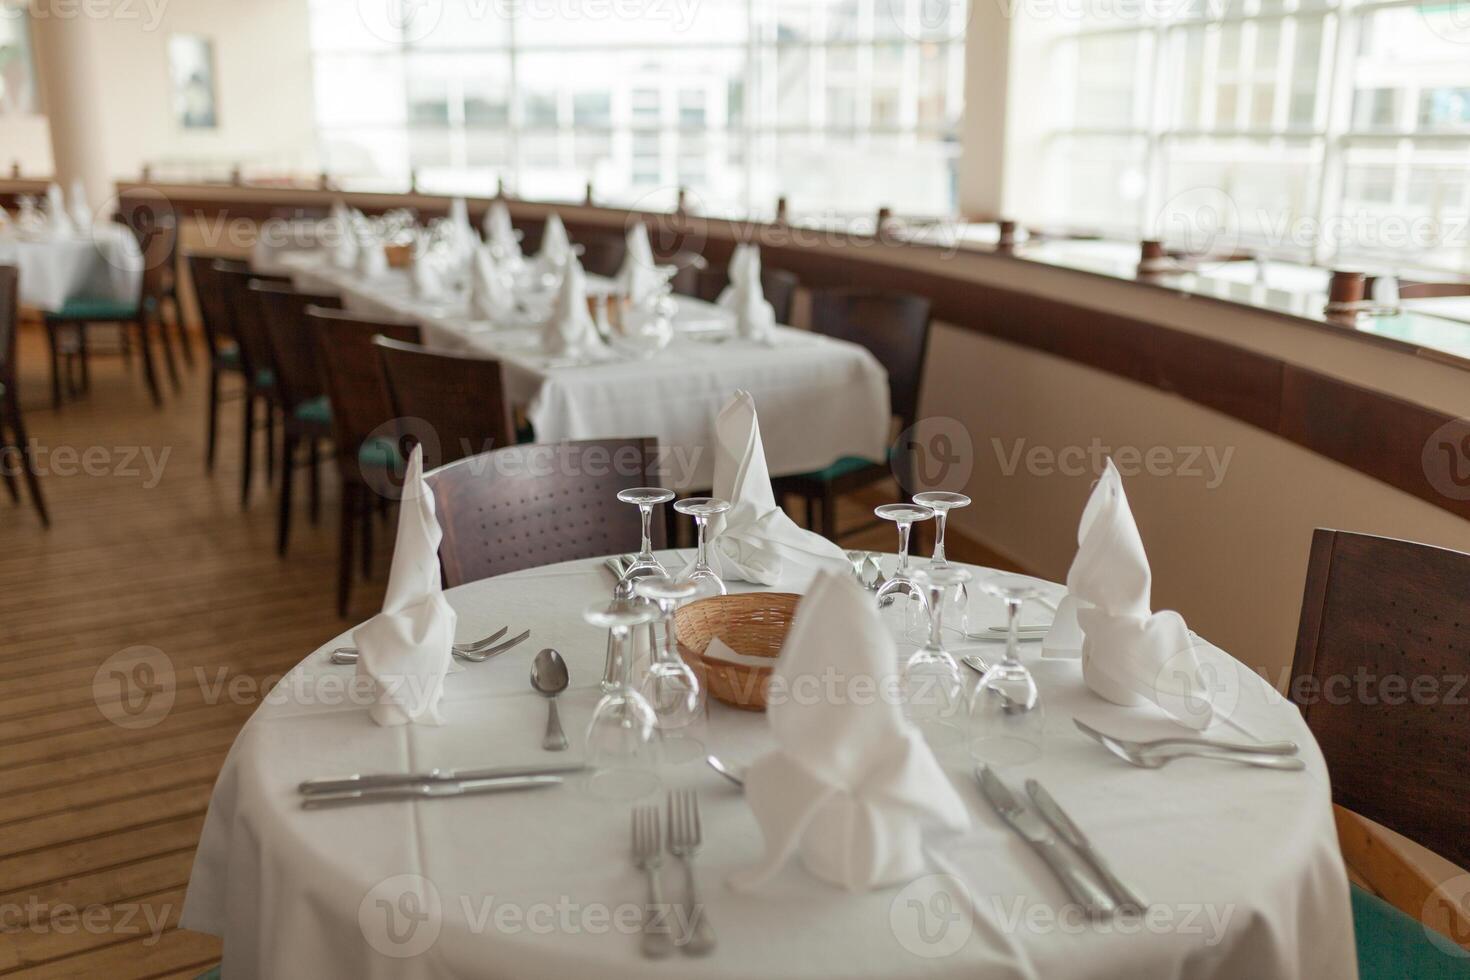 Beautiful table served with glassware and cultery, prepared for festive event. Special occasion celebrted in luxury restaurant or cafe. Table setting concept. Wedding table photo